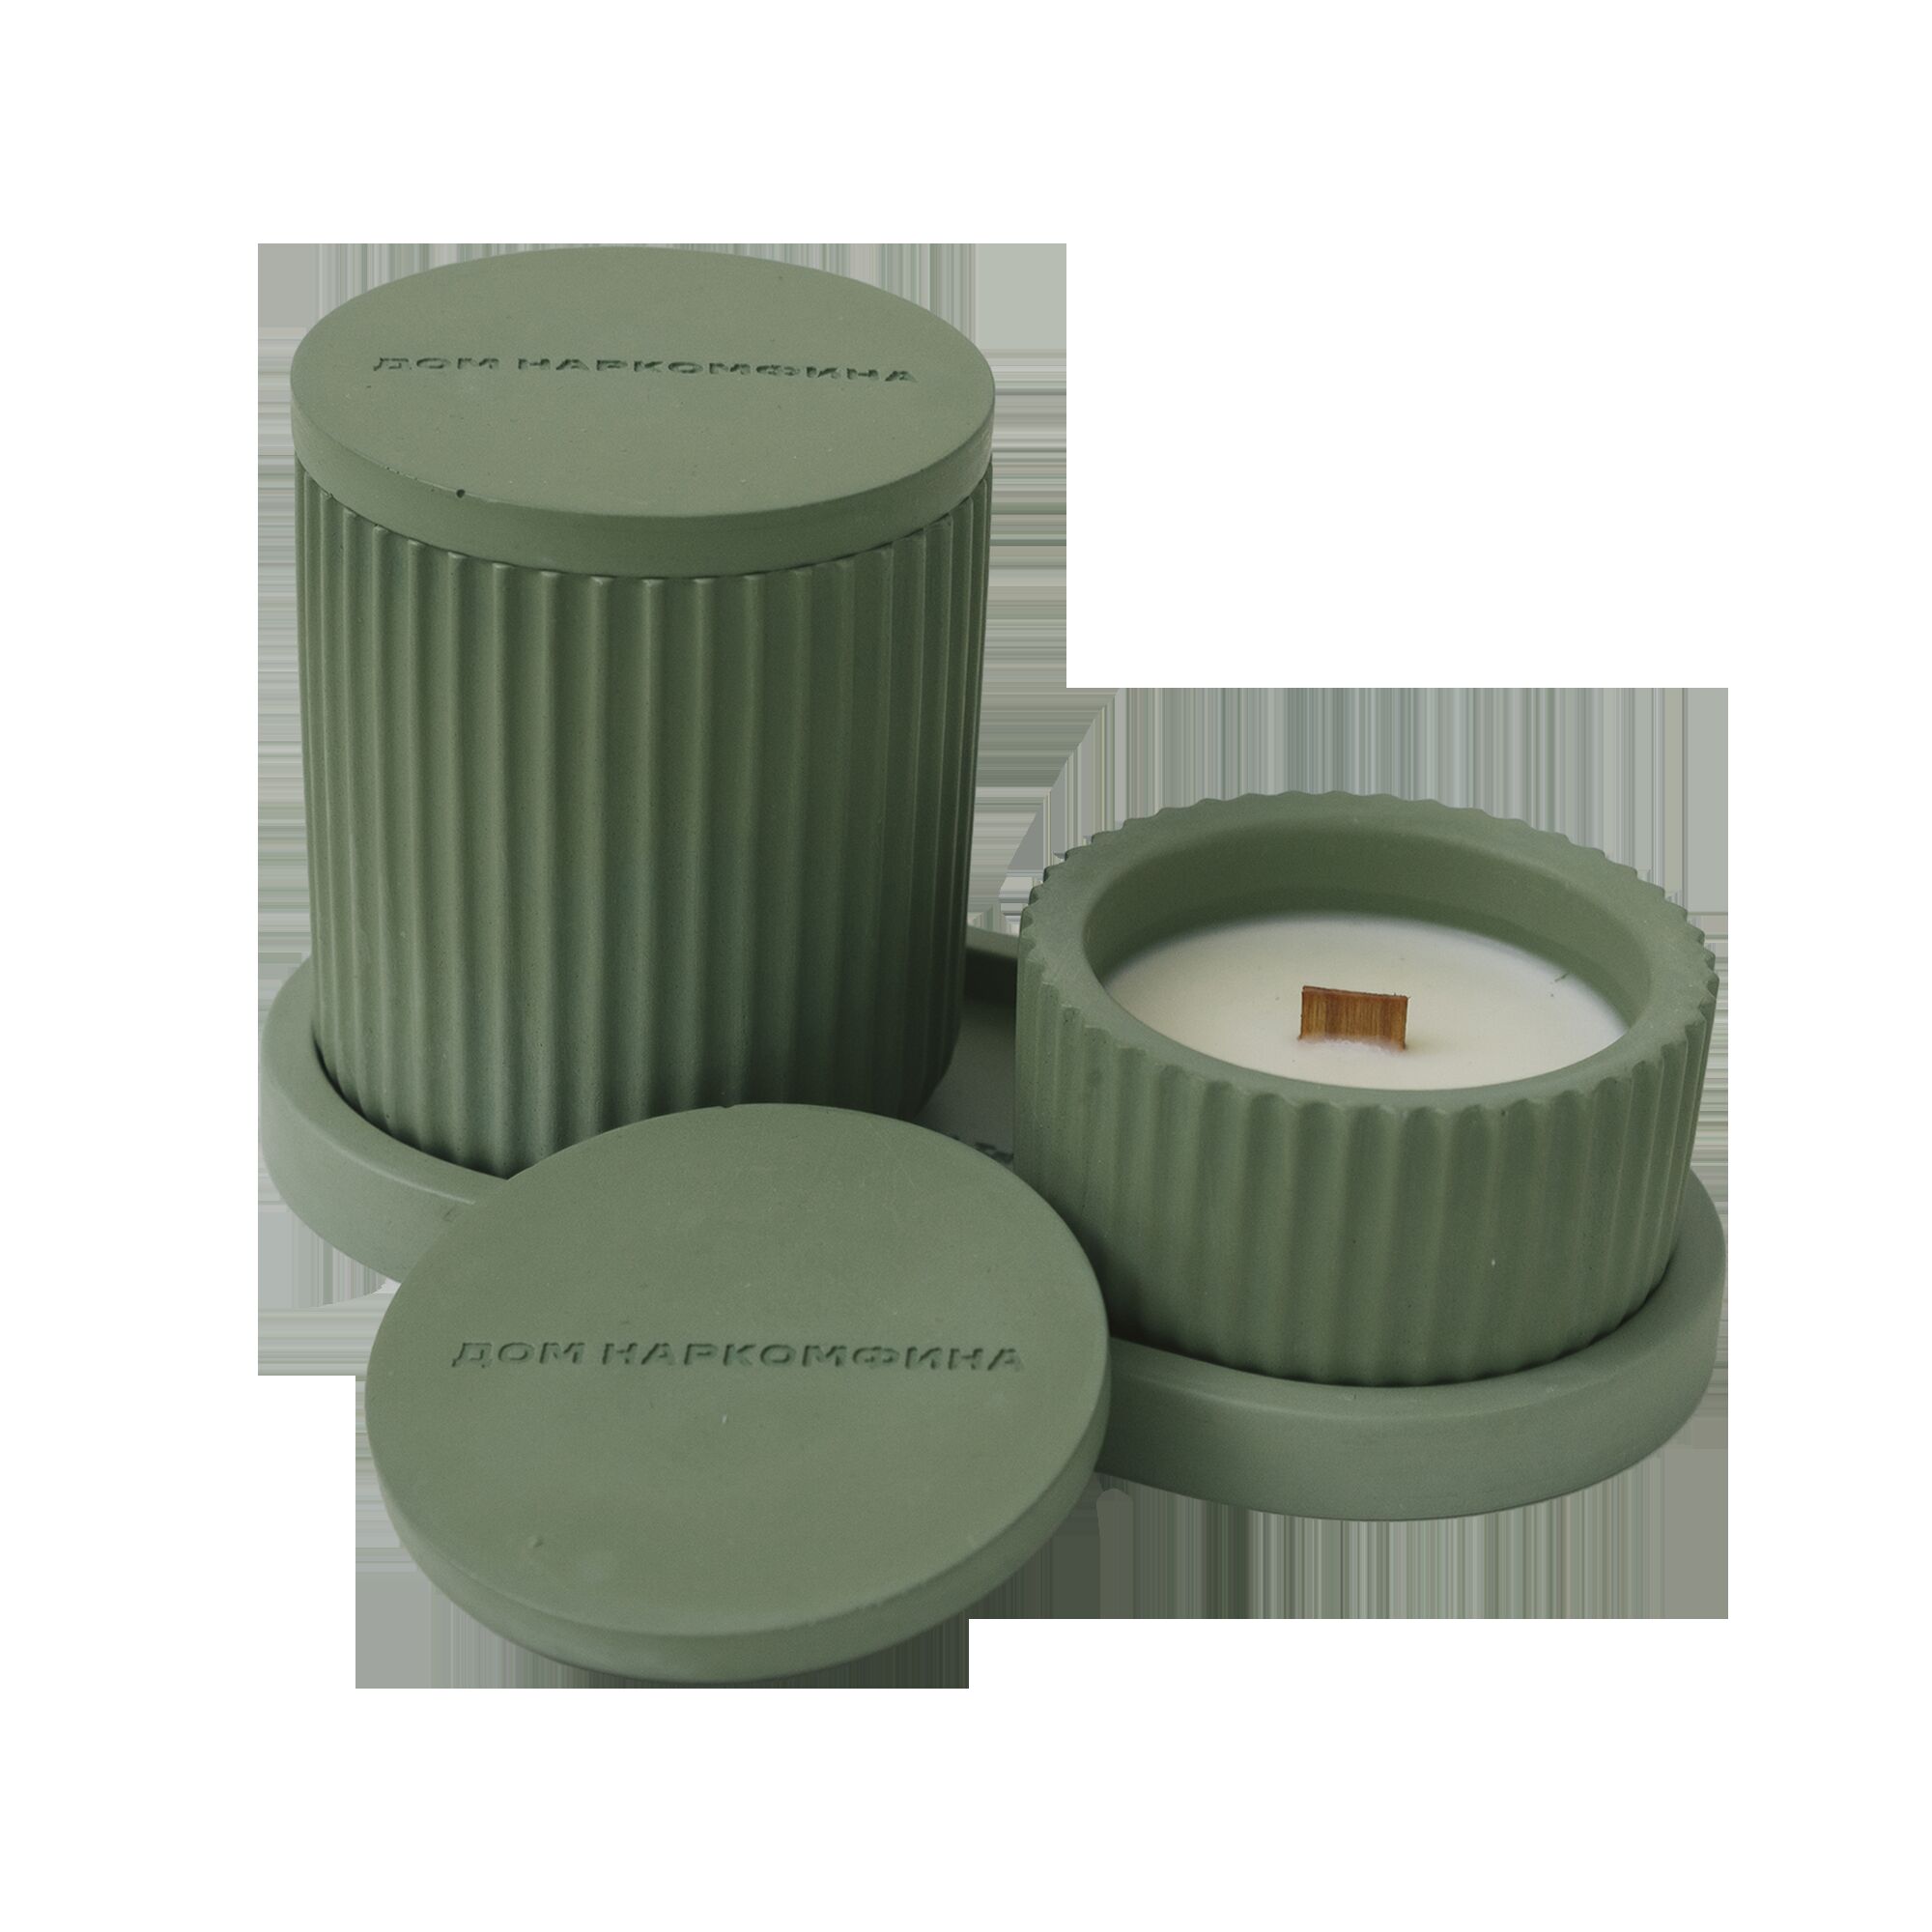 GK-2 Scented Candle Set